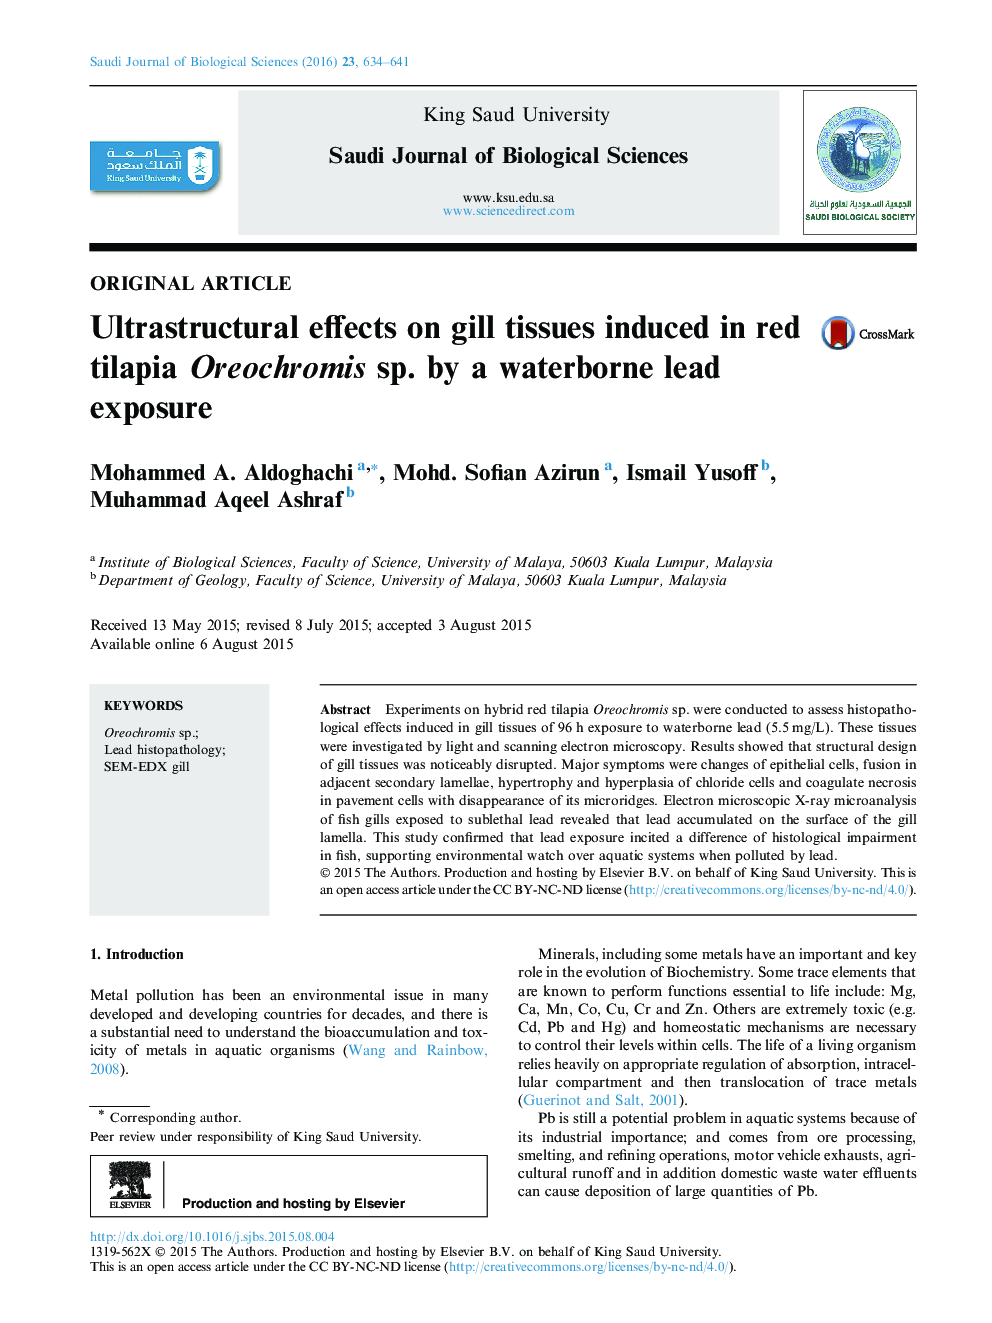 Ultrastructural effects on gill tissues induced in red tilapia Oreochromis sp. by a waterborne lead exposure 